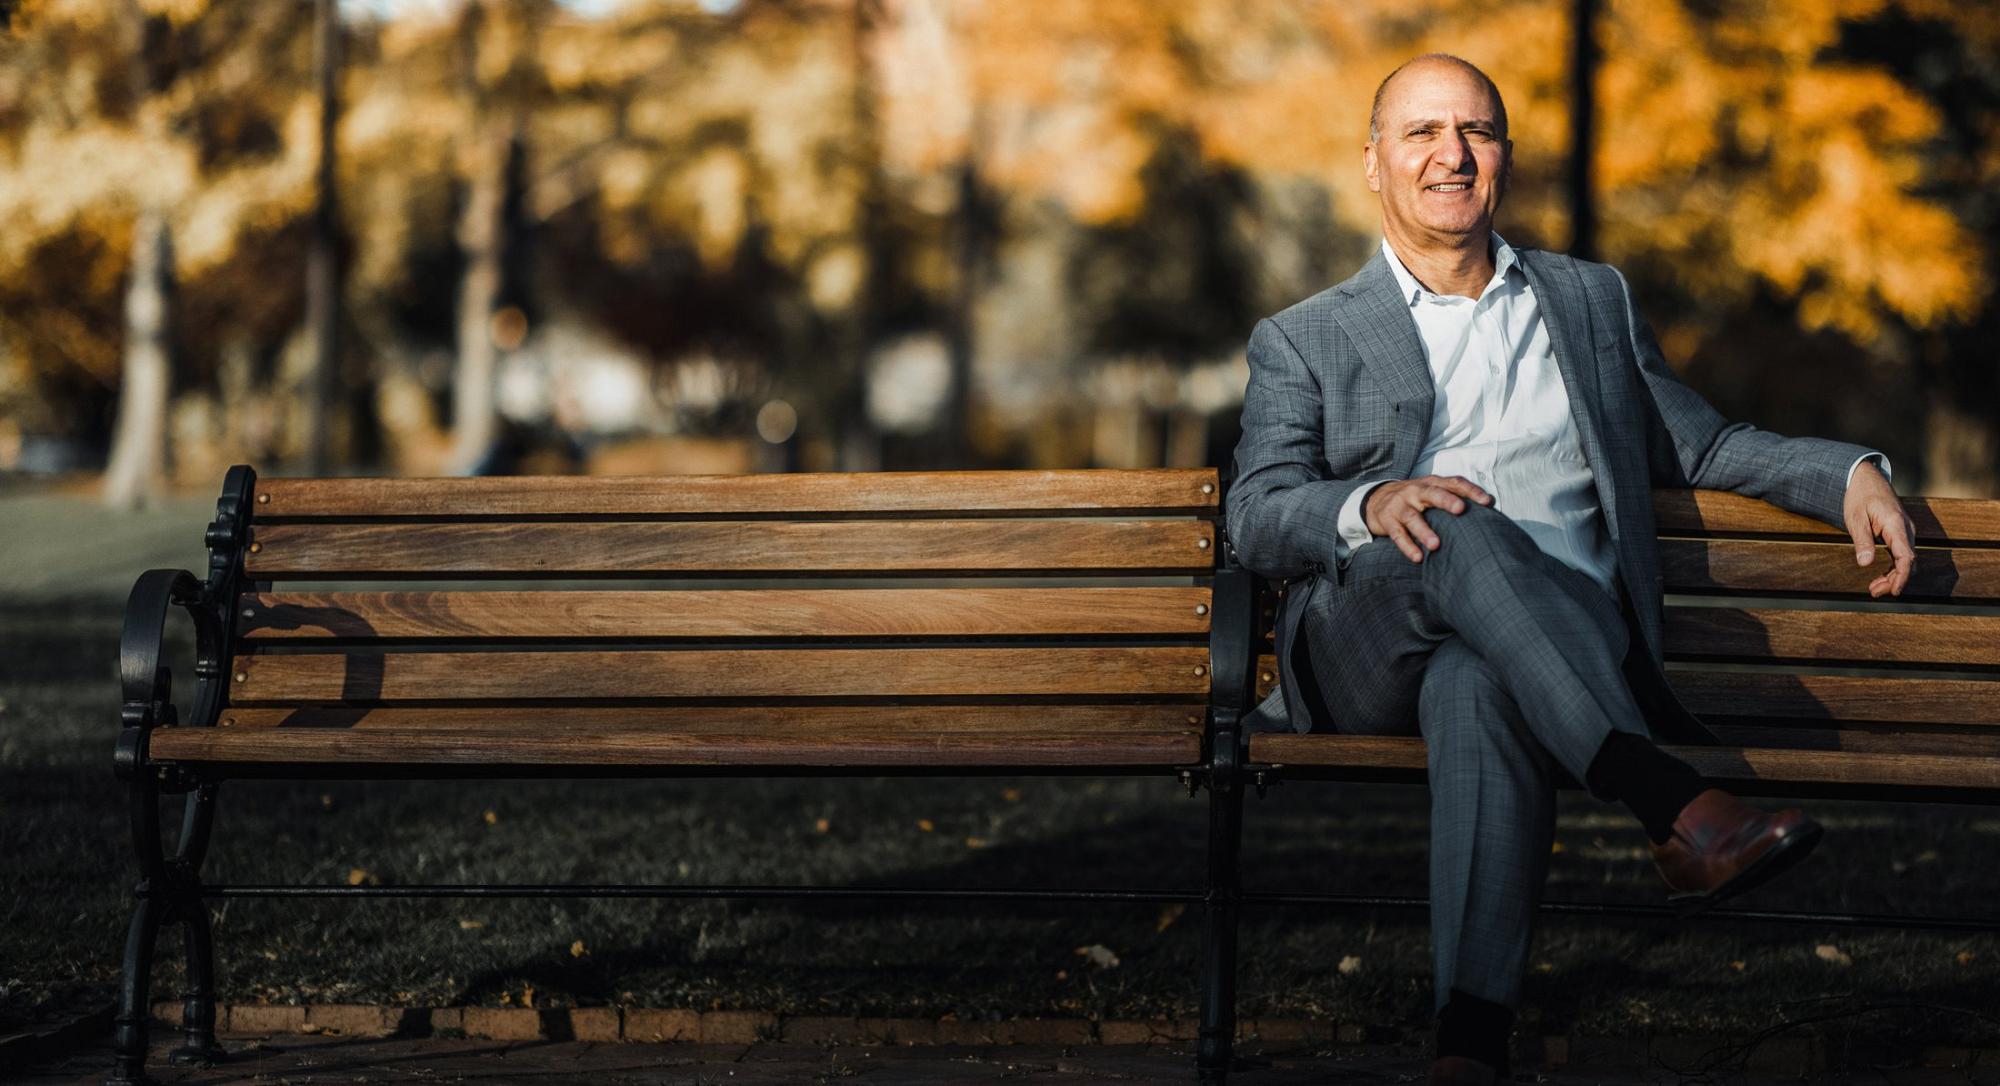 Dr. Russo - Boston Plastic Surgeon, sitting on a bench and smiling